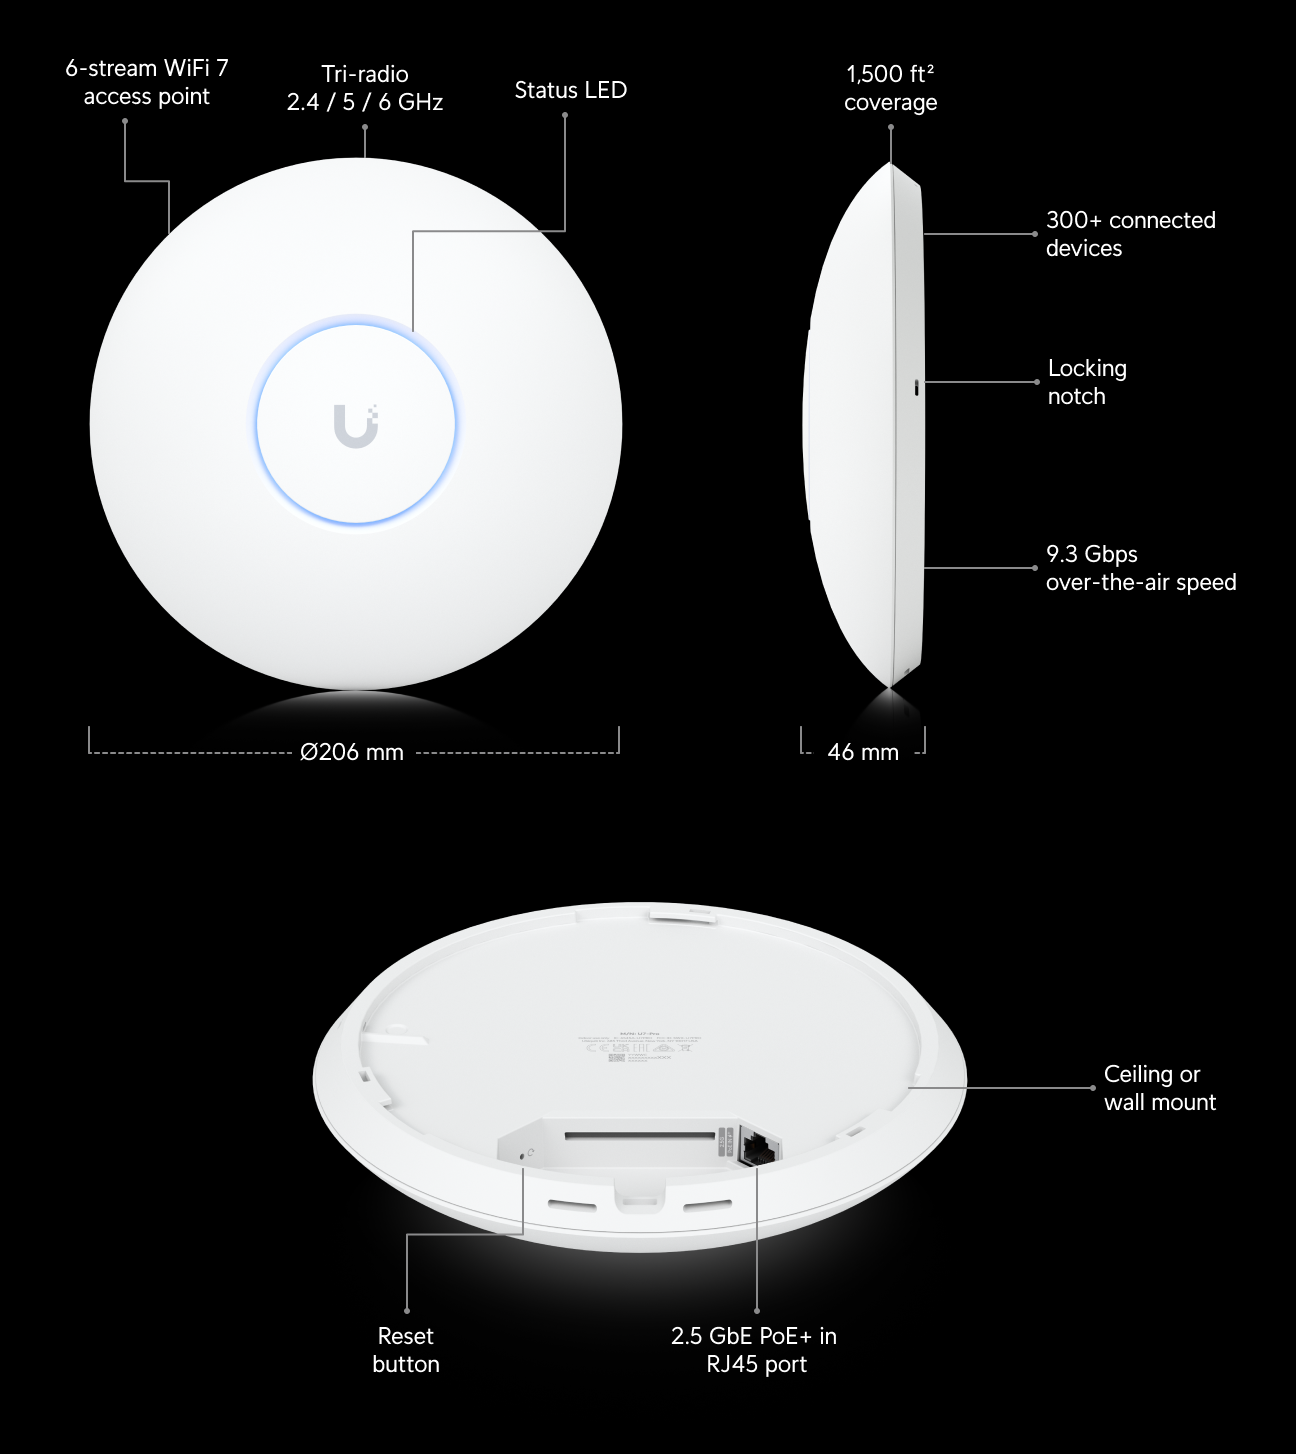 A large marketing image providing additional information about the product Ubiquiti UniFi WiFi 7 AP U7-Pro Access Point - Additional alt info not provided